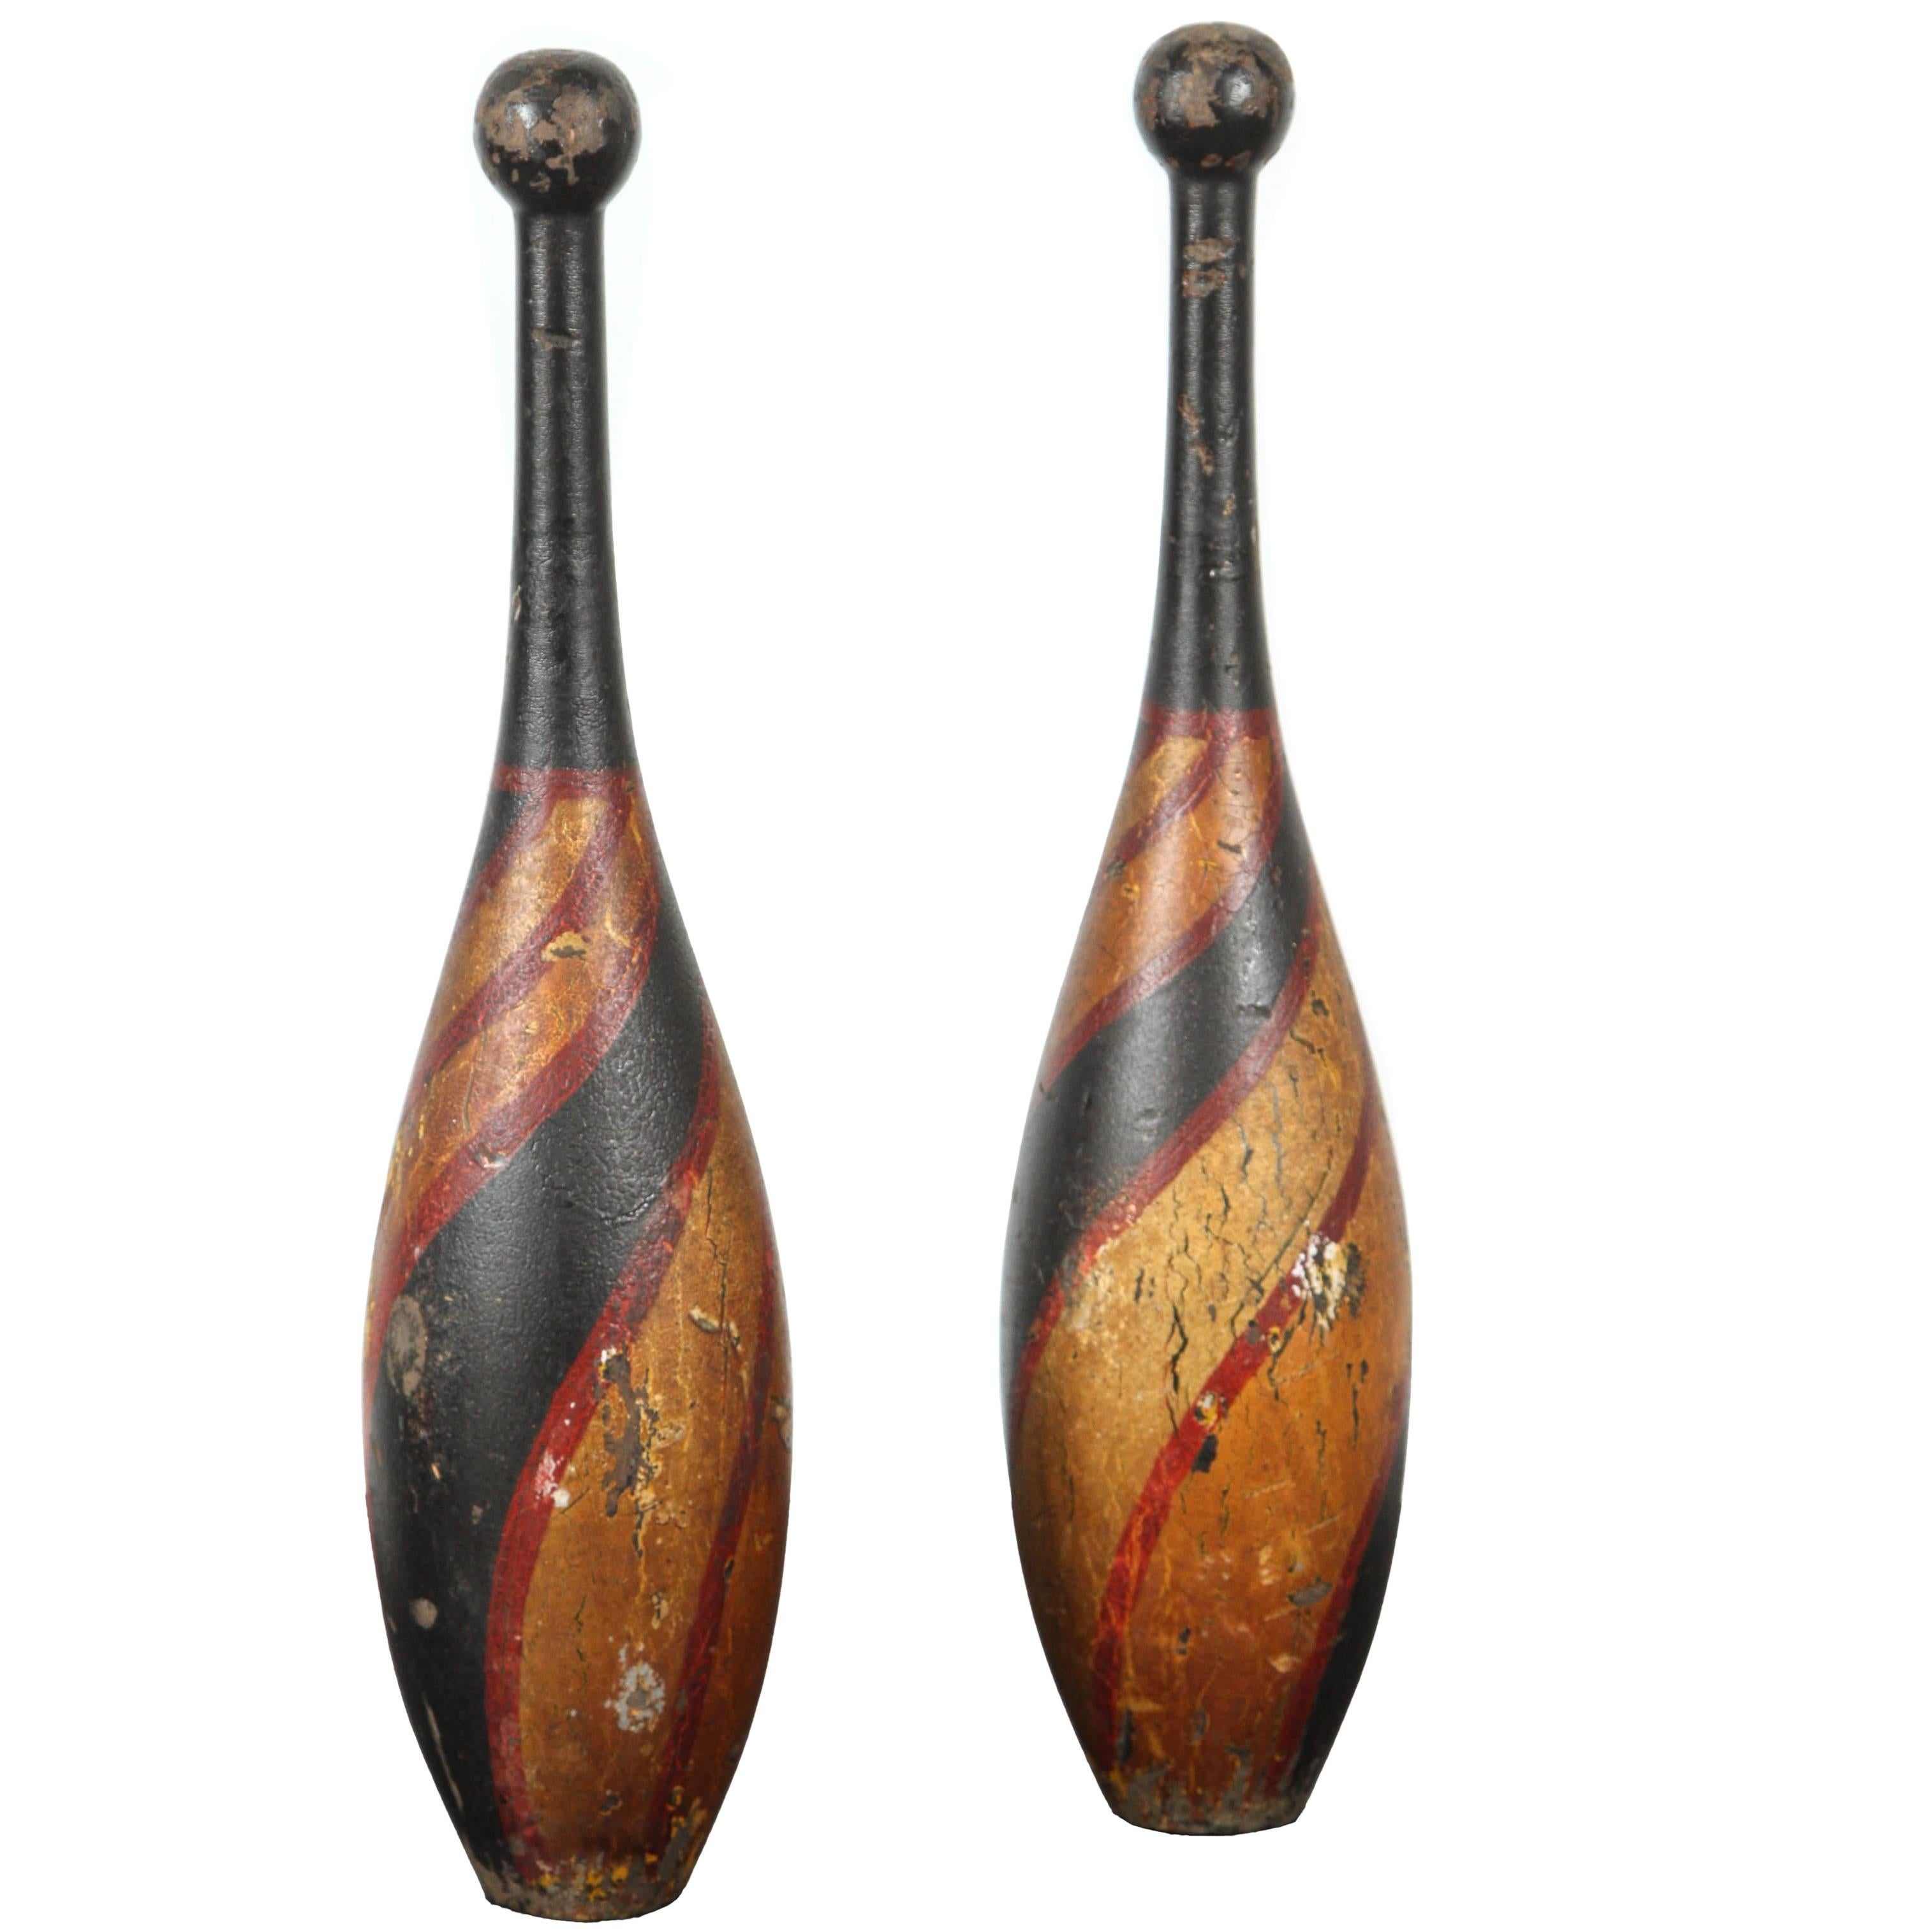 Pair of Late 19th Century Indian Clubs with Original Paint Surface